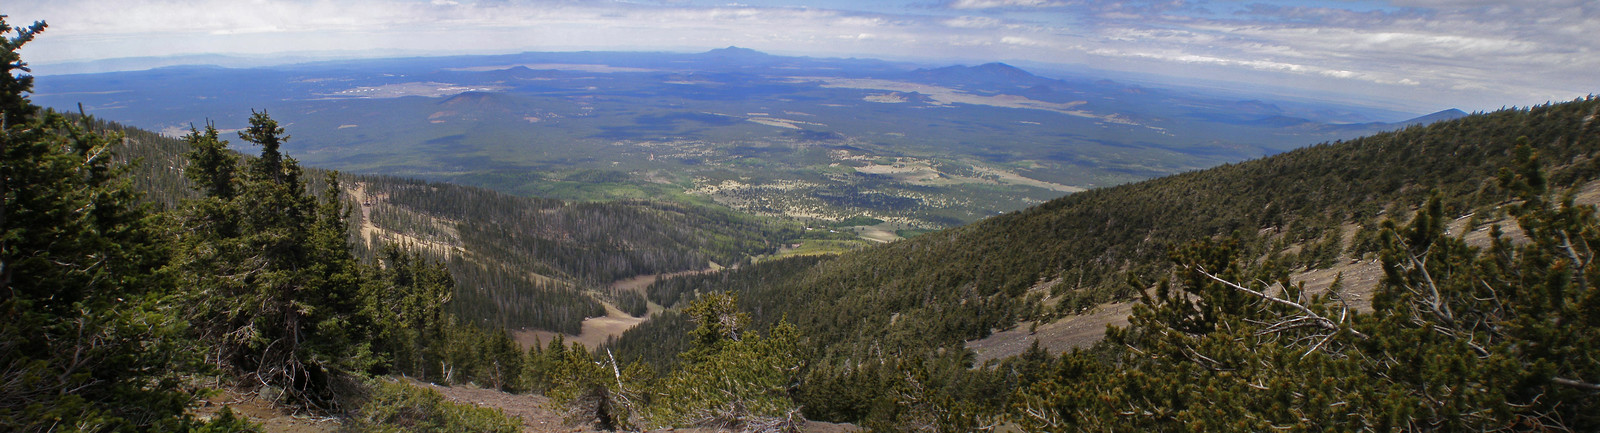 Panorama of Snowbowl basin seen from above